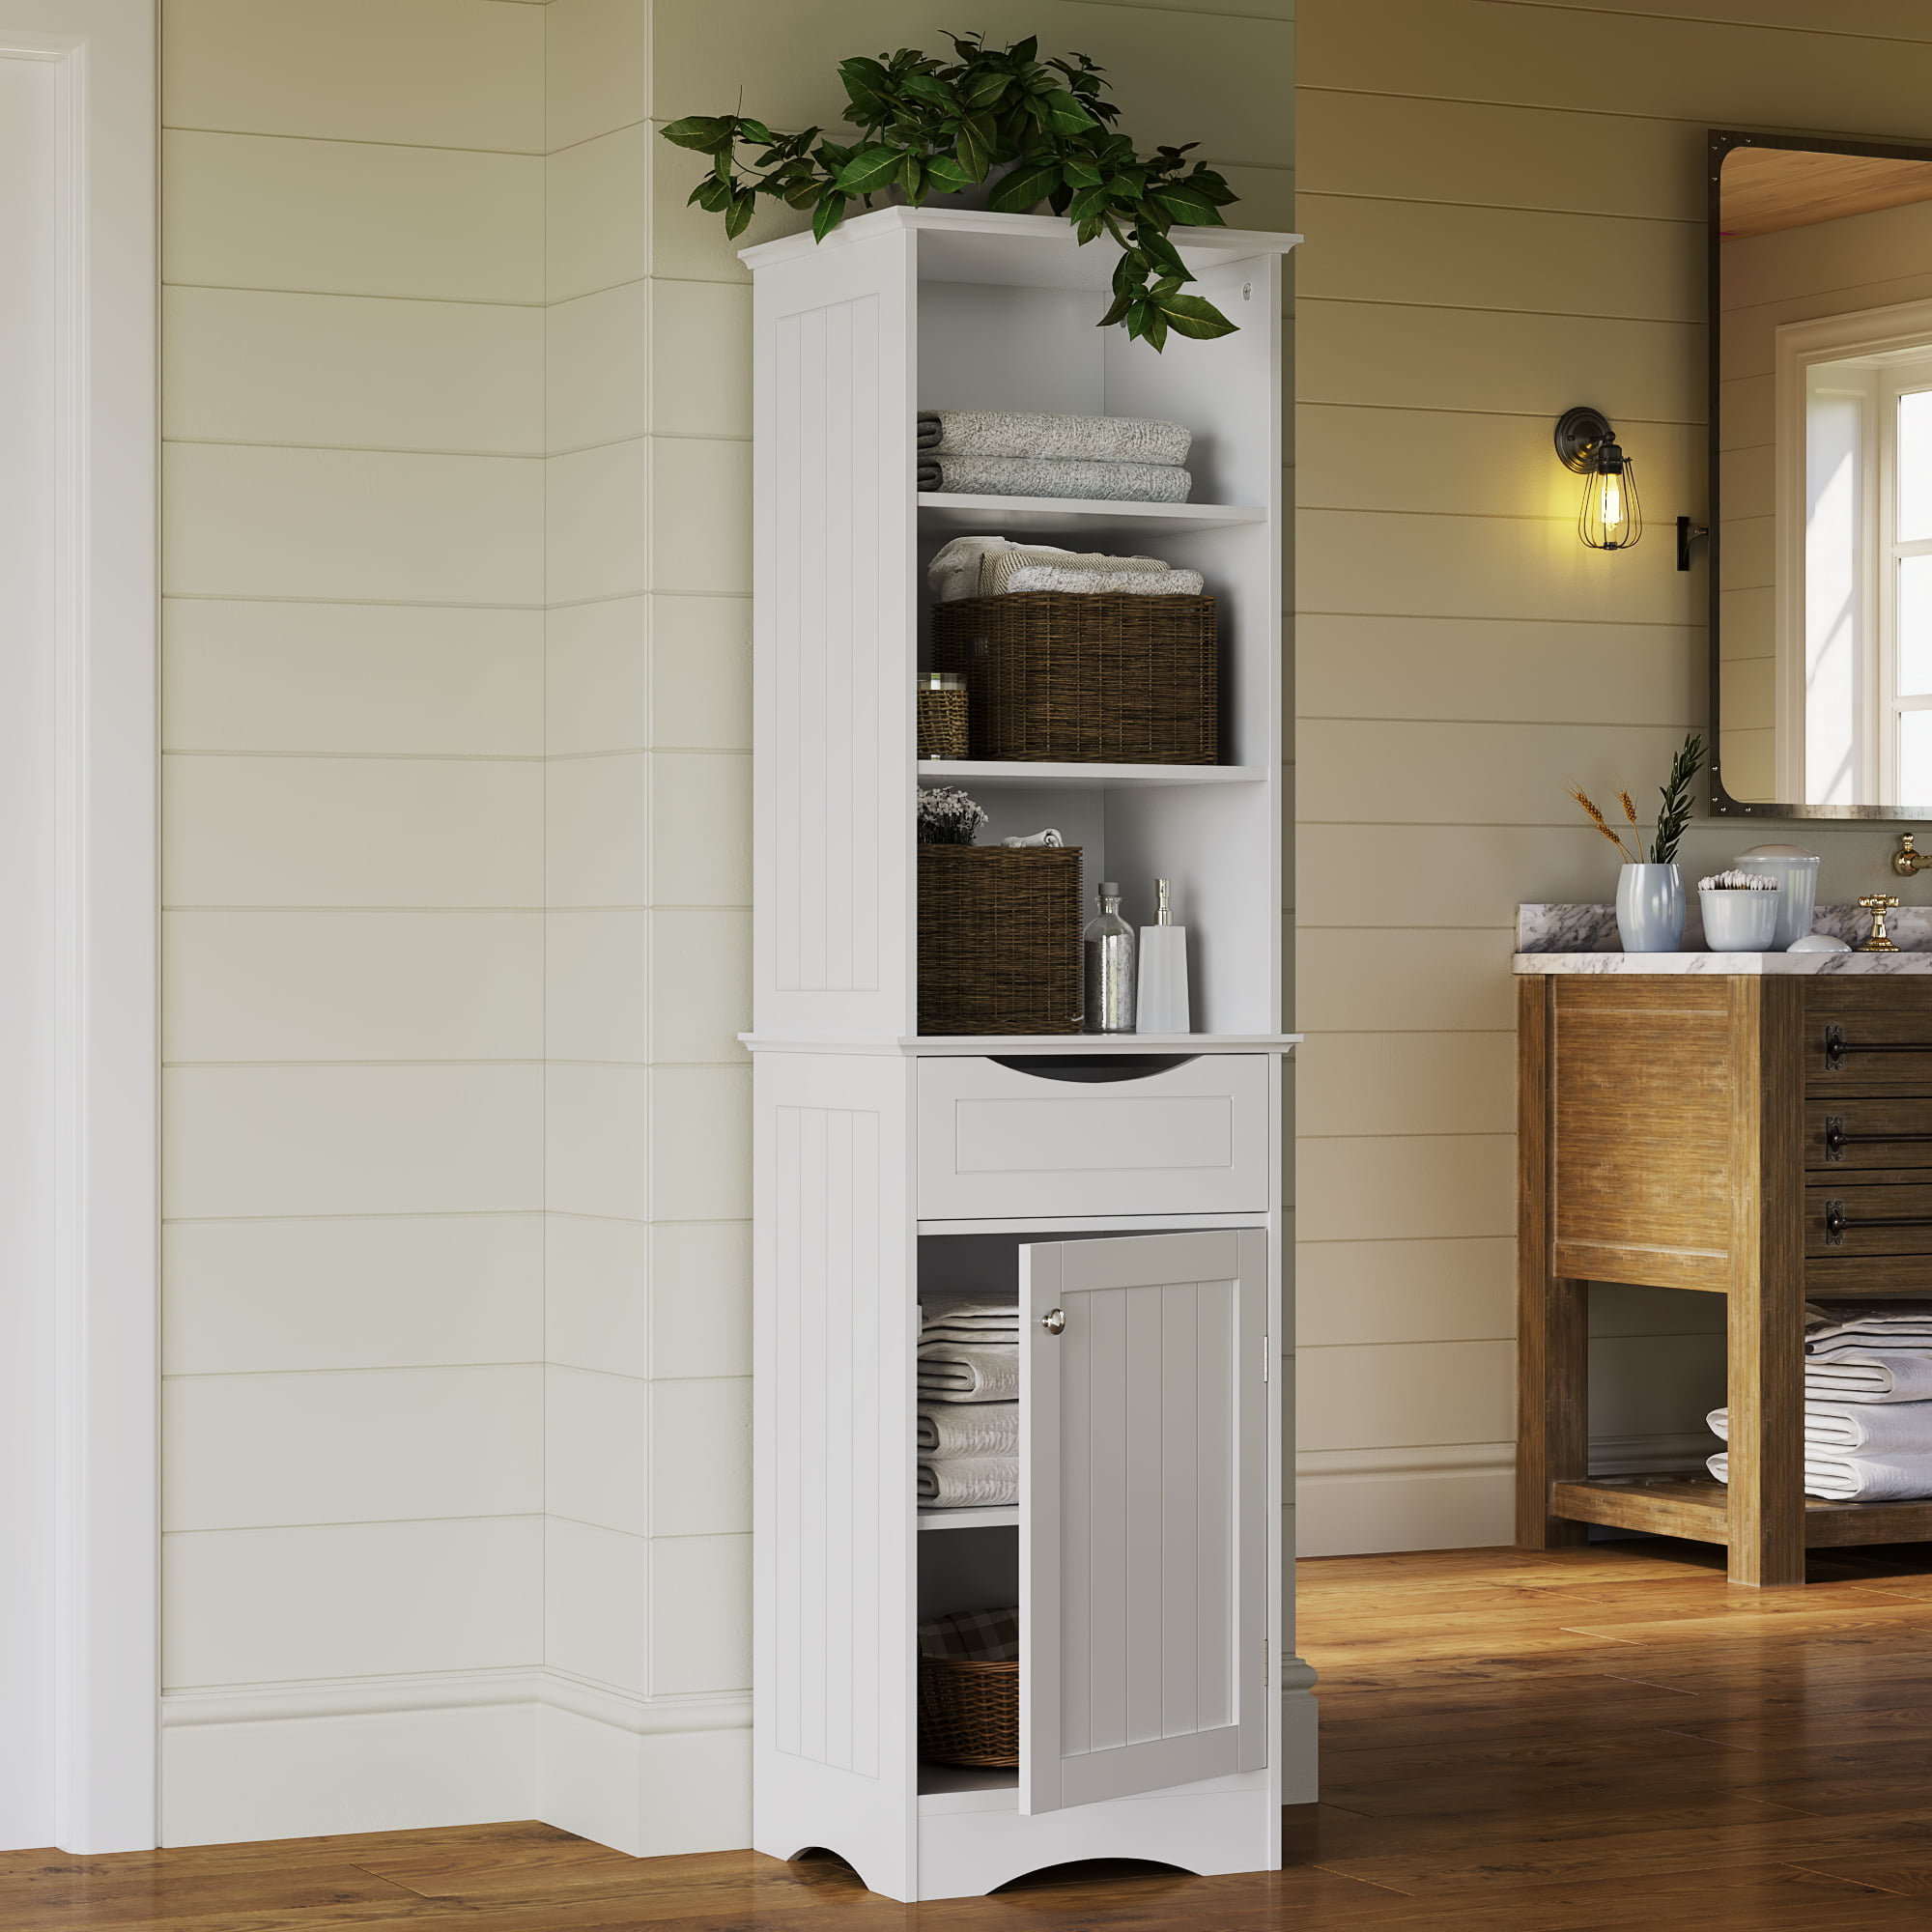 RiverRidge Ashland Collection Tall Linen Cabinet for ...